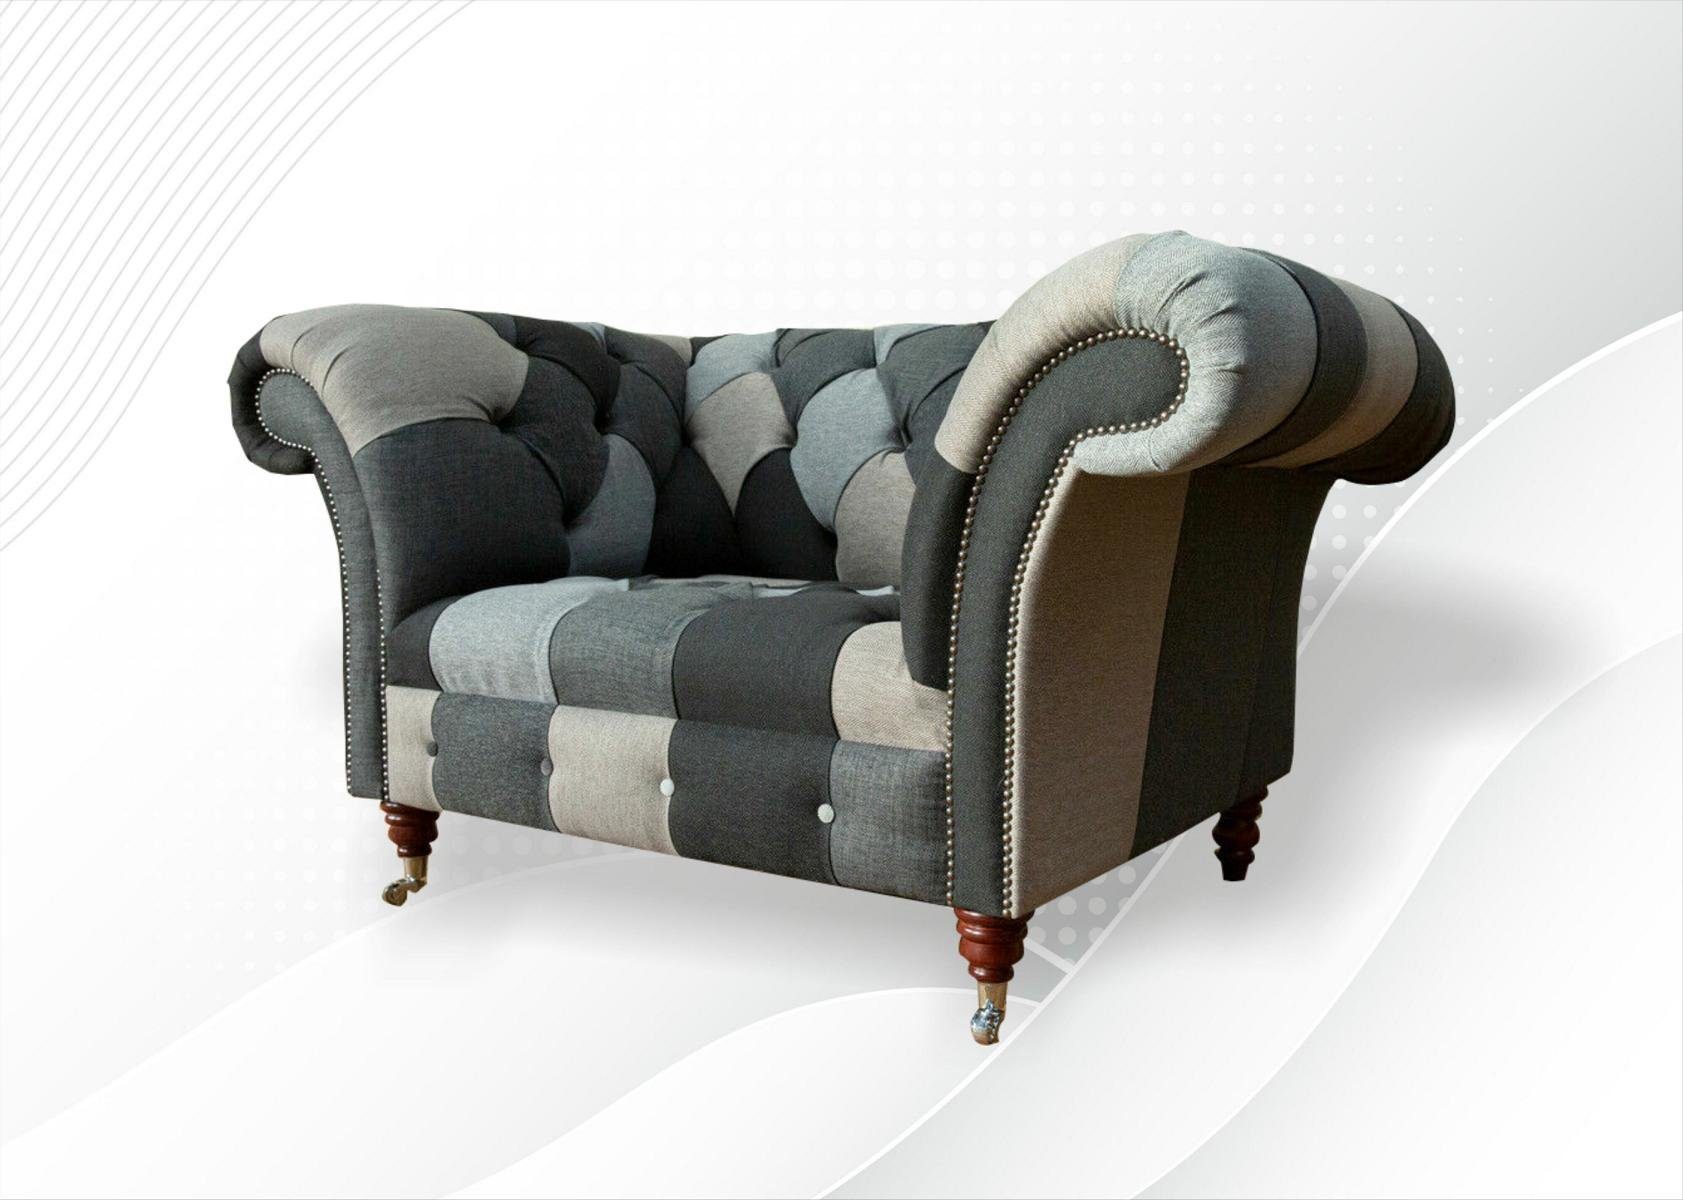 Sitzer Stoff Polster Couch 1.5 Designer Sofa Sofa, Made Sessel in JVmoebel Europe Luxus Chesterfield